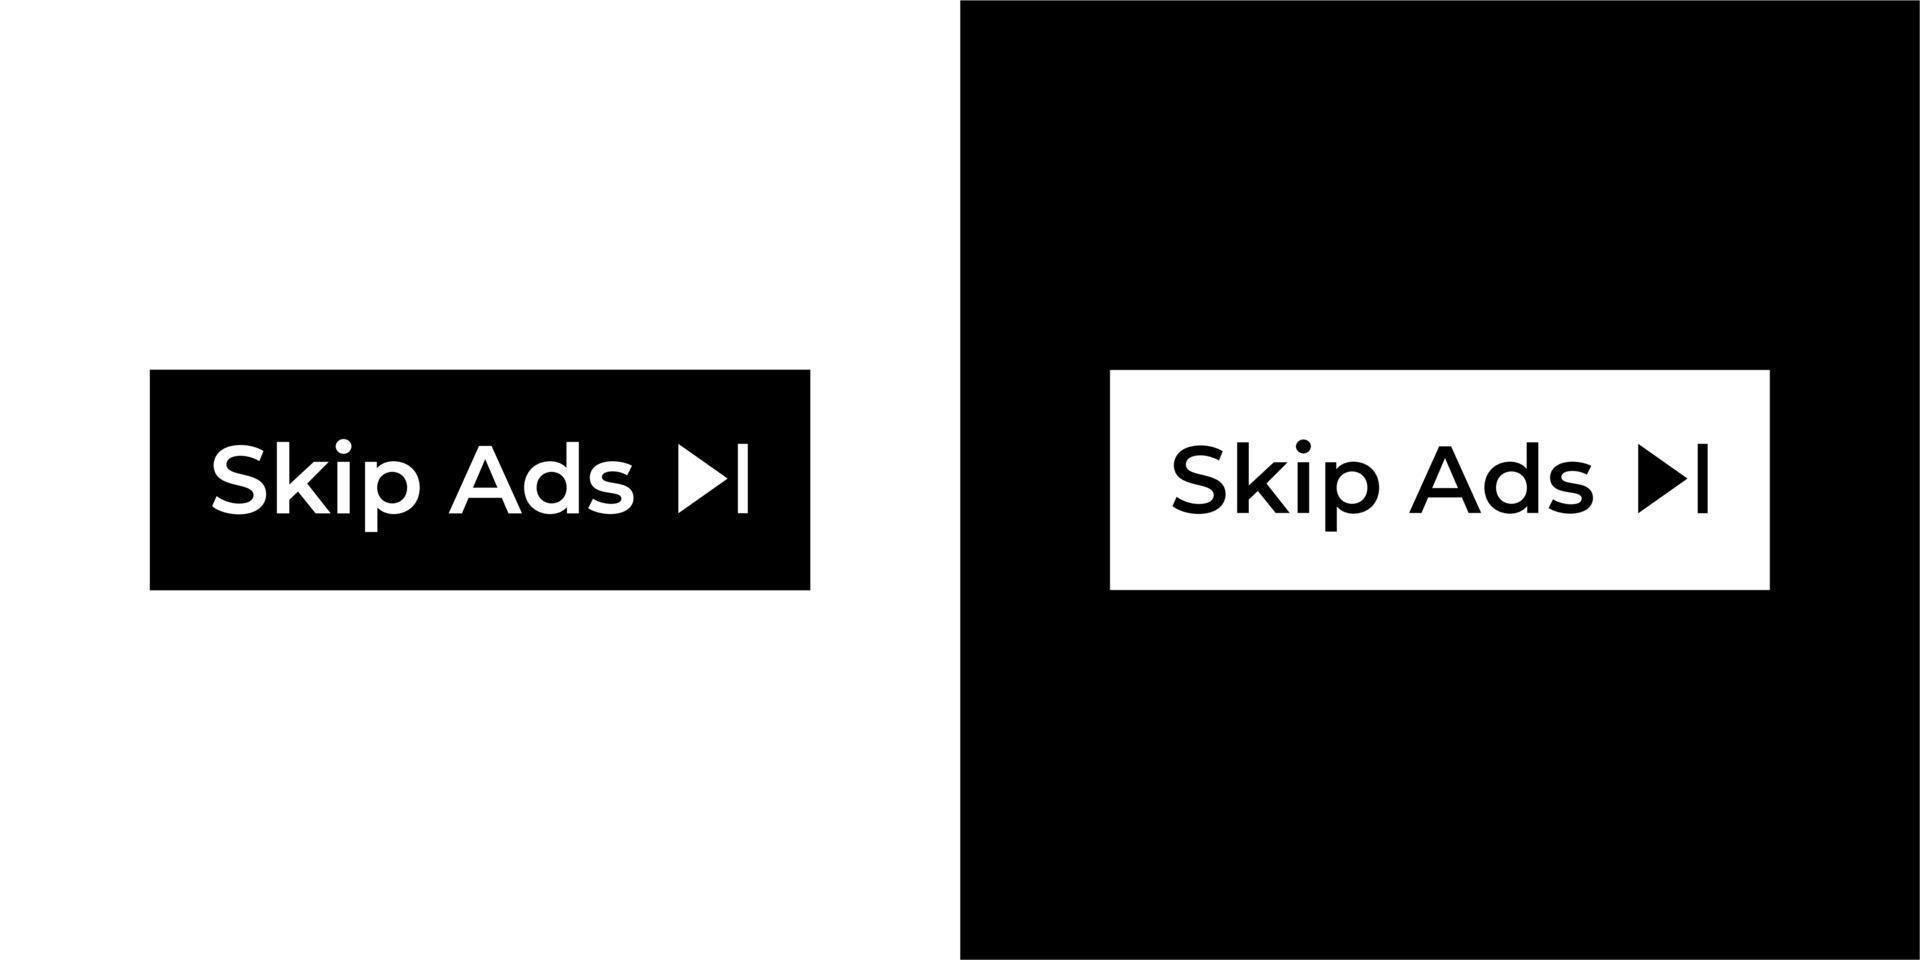 Skip ads button icon vector in clipart style. Advertising elements